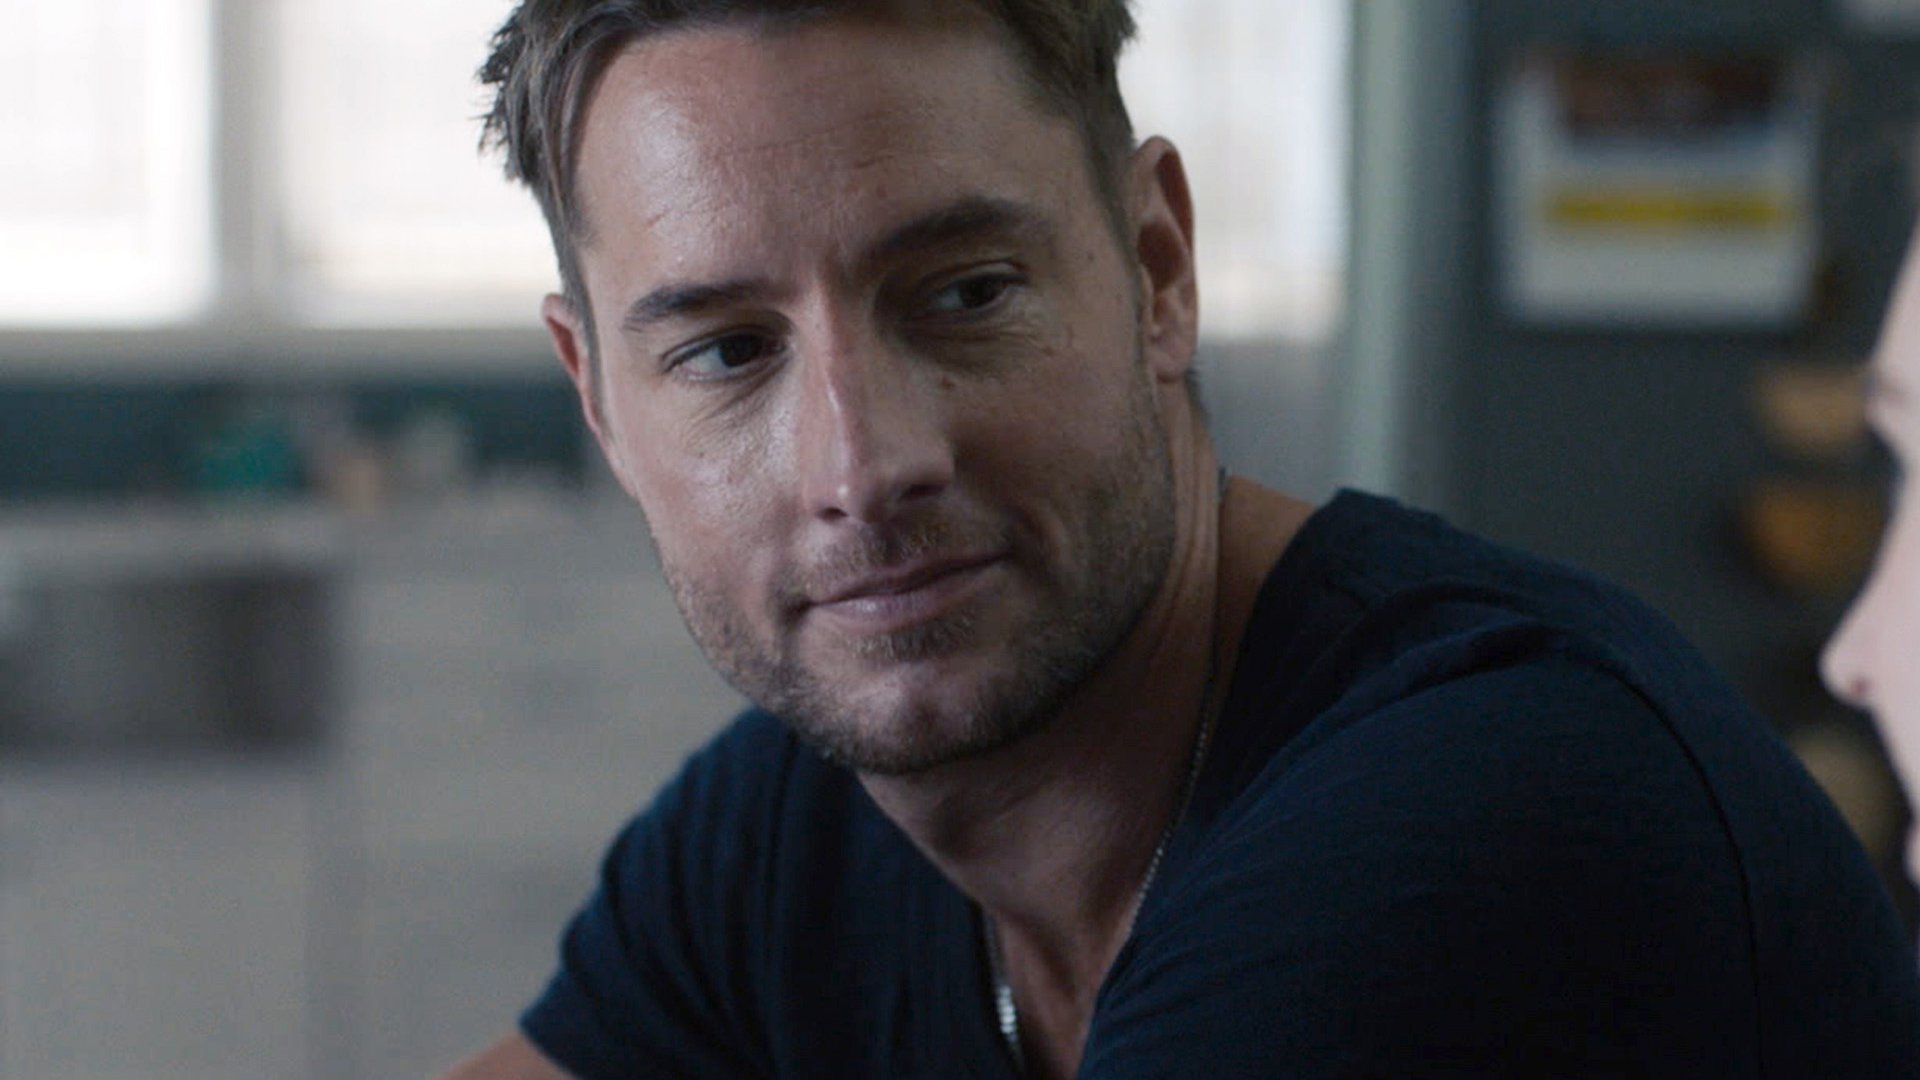 Justin Hartley as Kevin, Caitlin Thompson as Madison on 'This Is Us' Season 5 Episode 5 in 2021